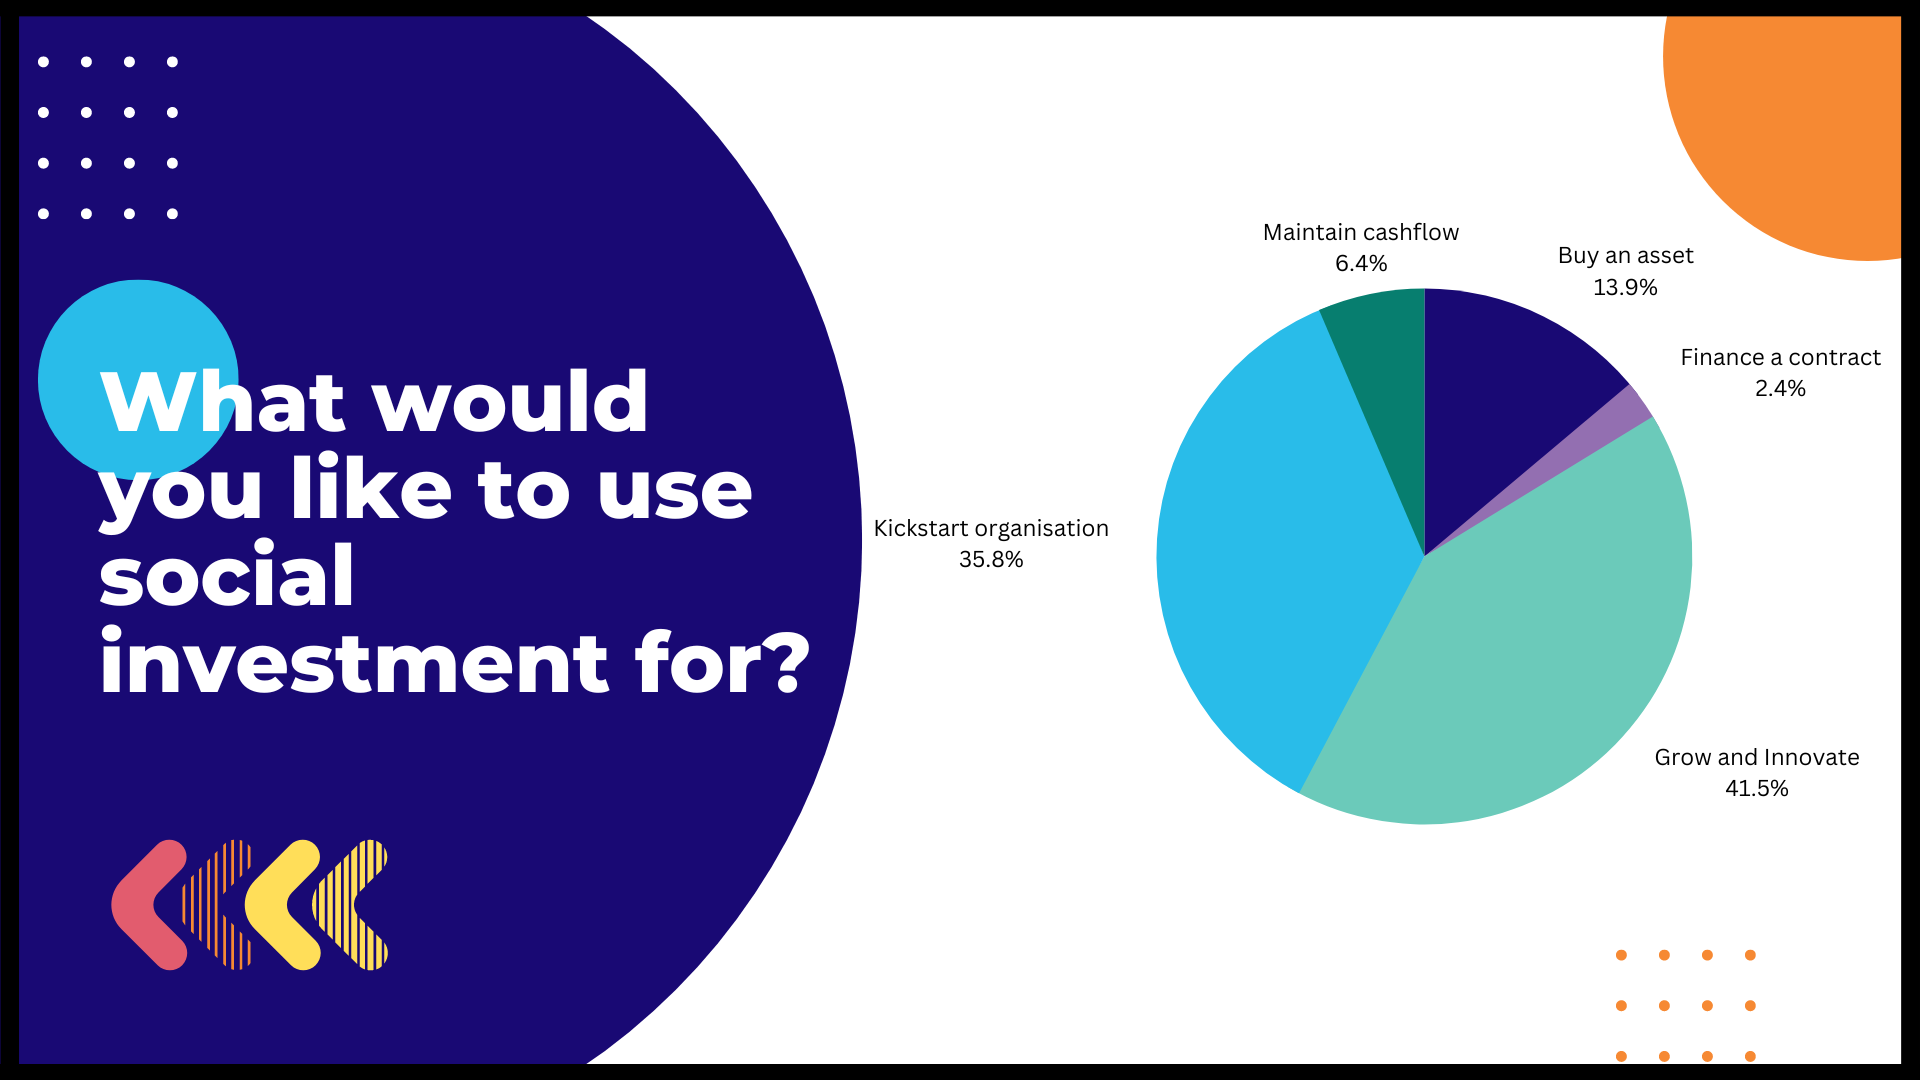 What would you like to use social investment for?